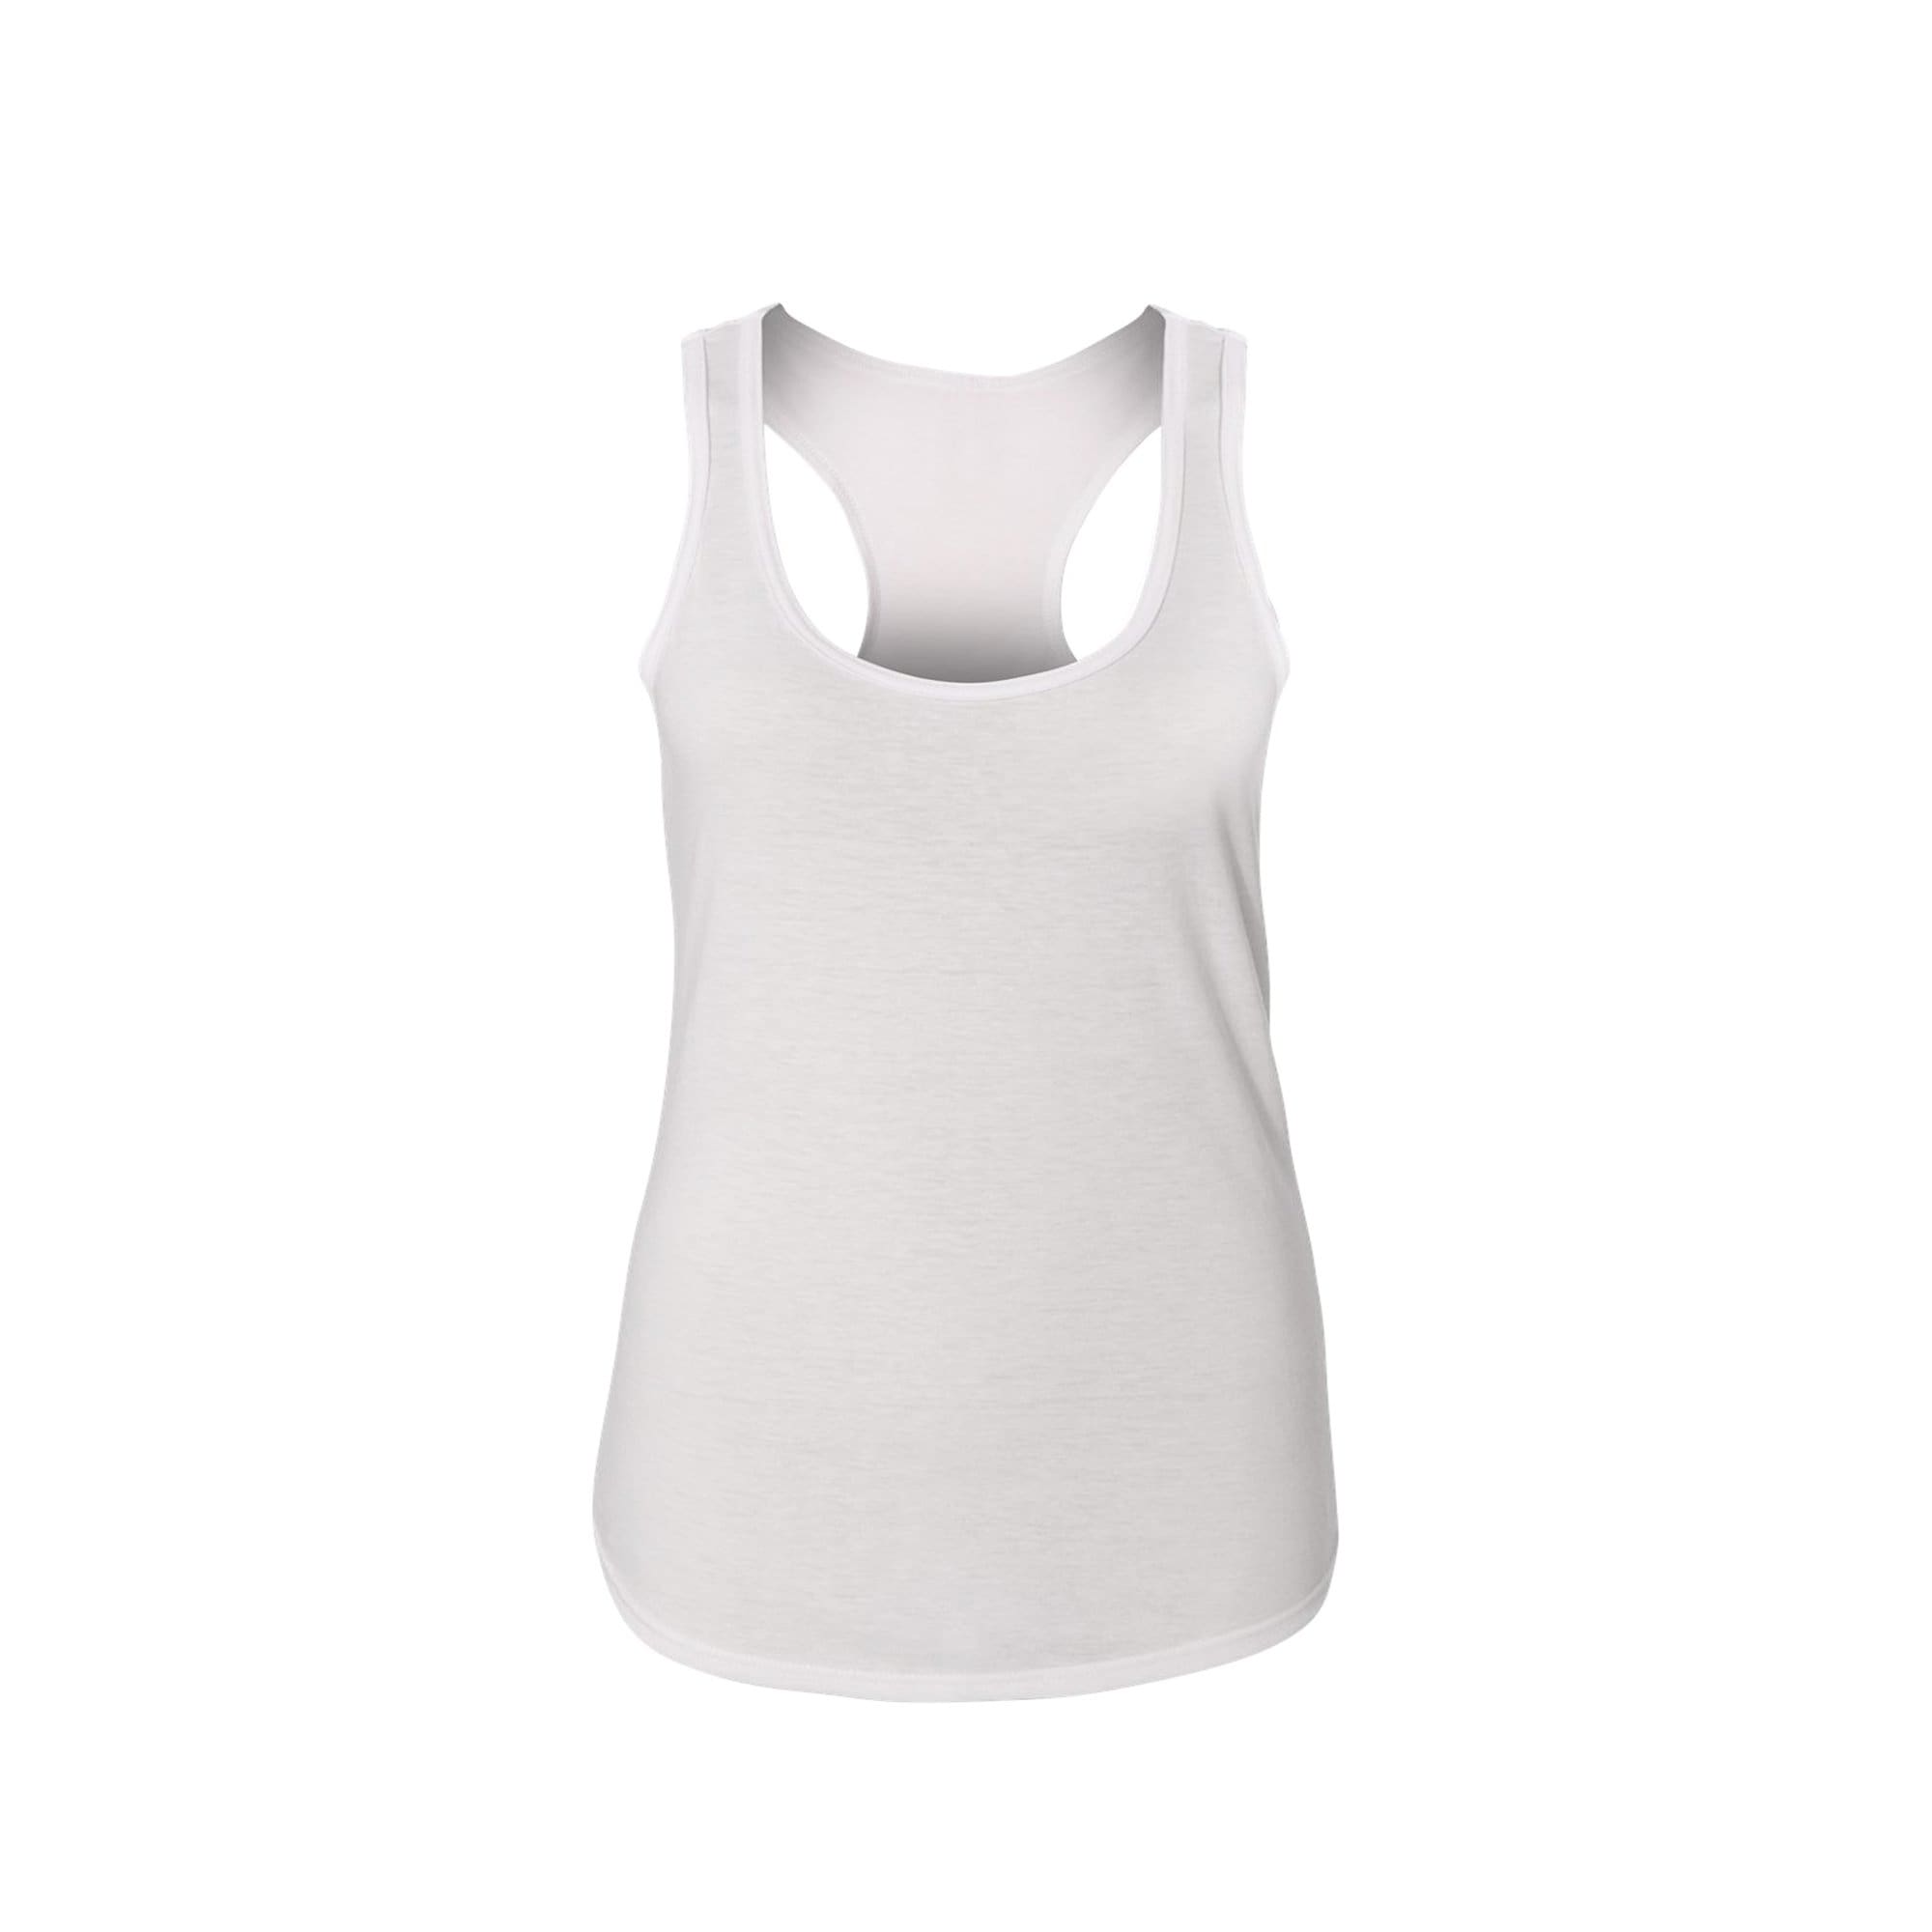 Ladies tri-blend racerback tank top for embroidery or screen print at ...